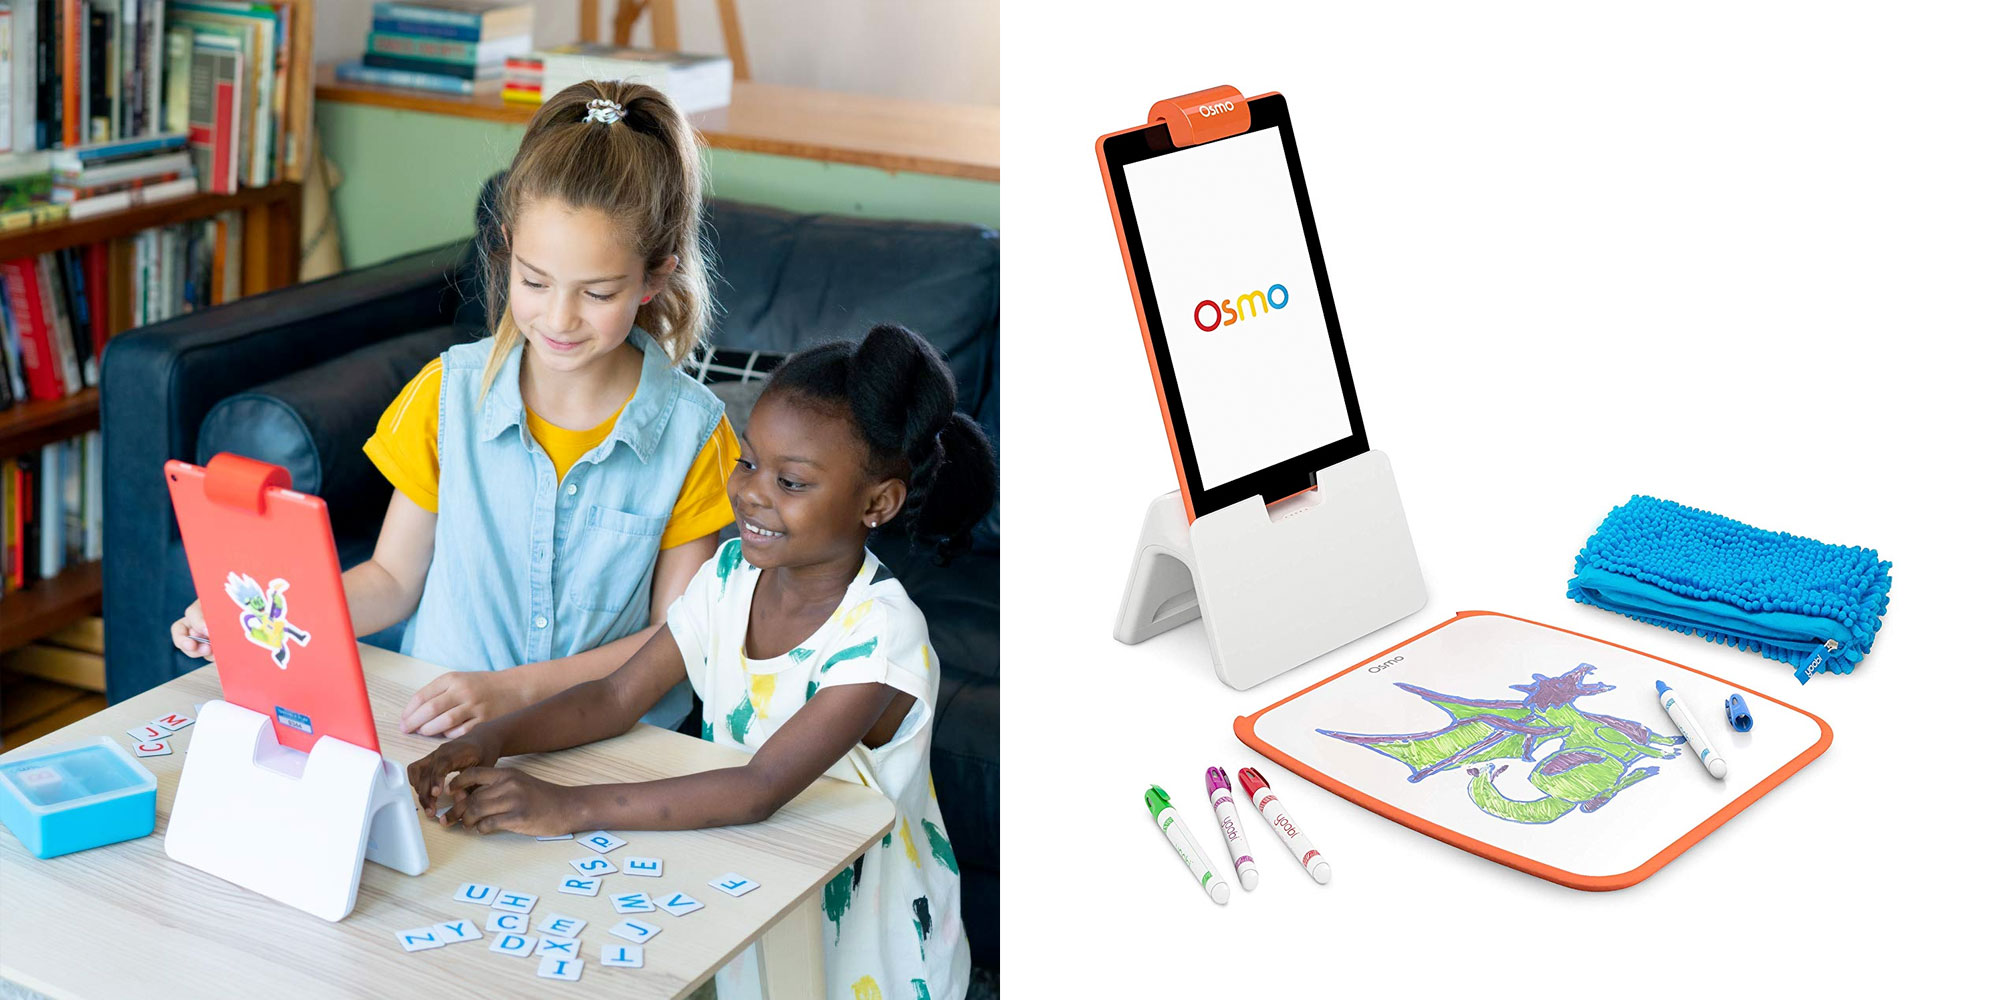 osmo company download free